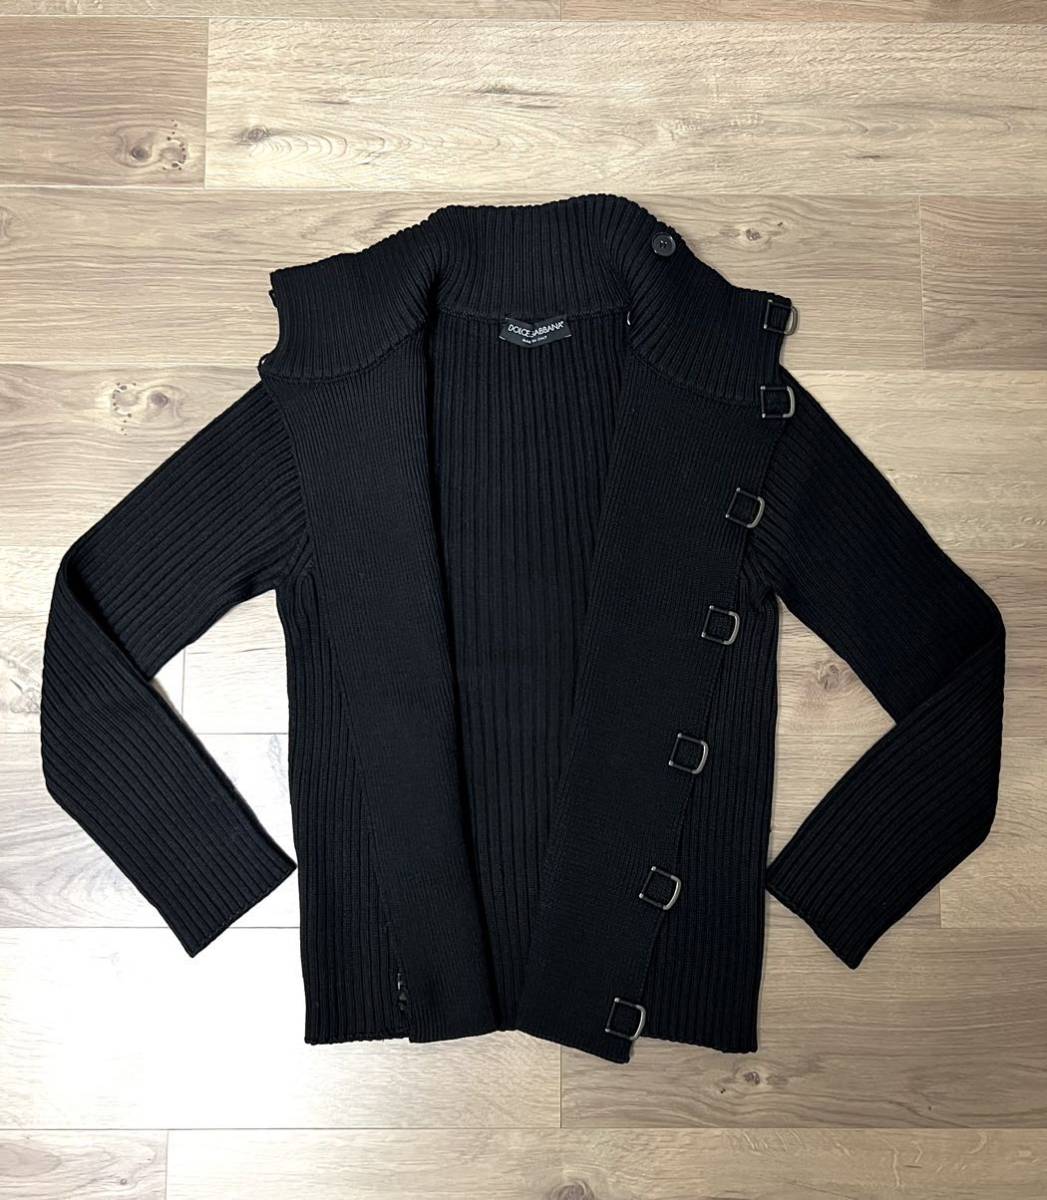  beautiful goods rare design DOLCE&GABBANA hook attaching rib knitted cardigan black size 44 ( size 46* size 48. person . have on possible )